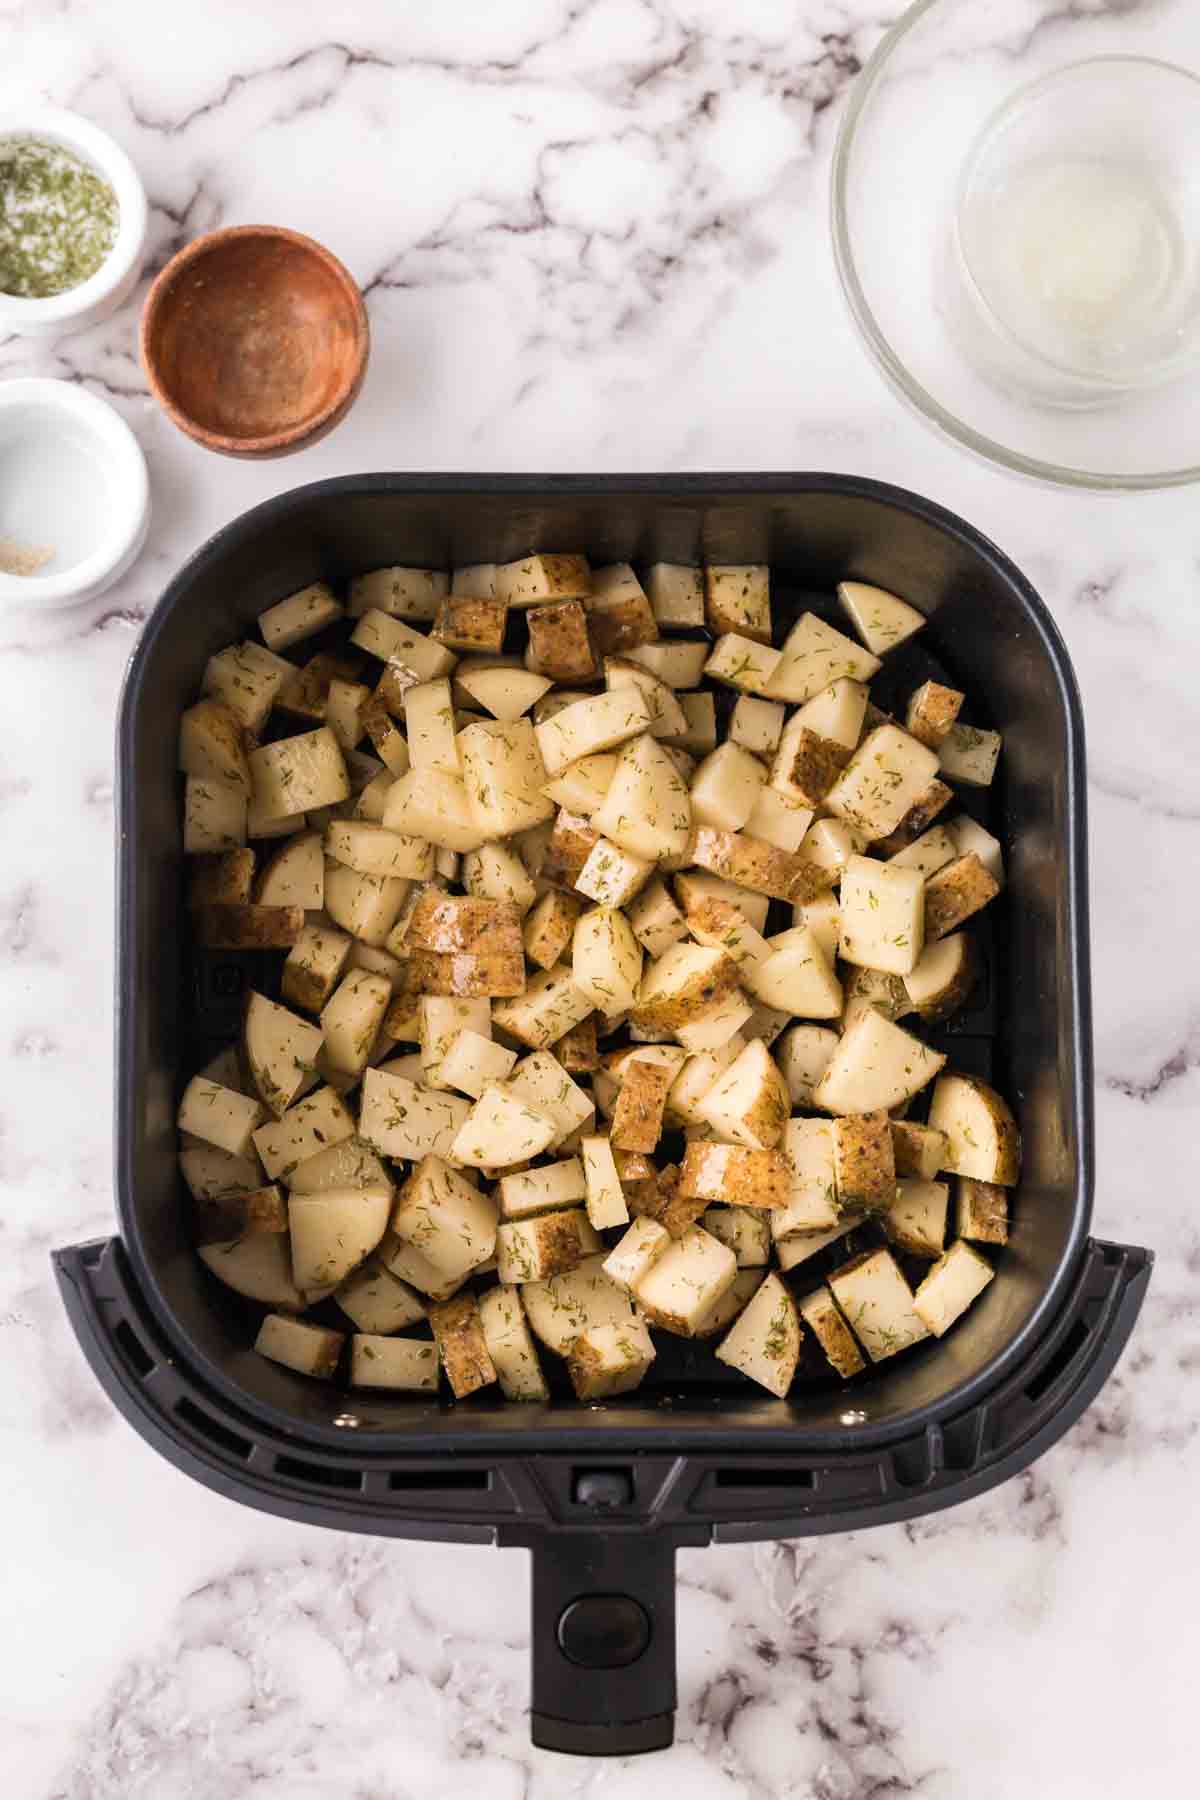 black air fryer basket with diced uncooked potatoes.